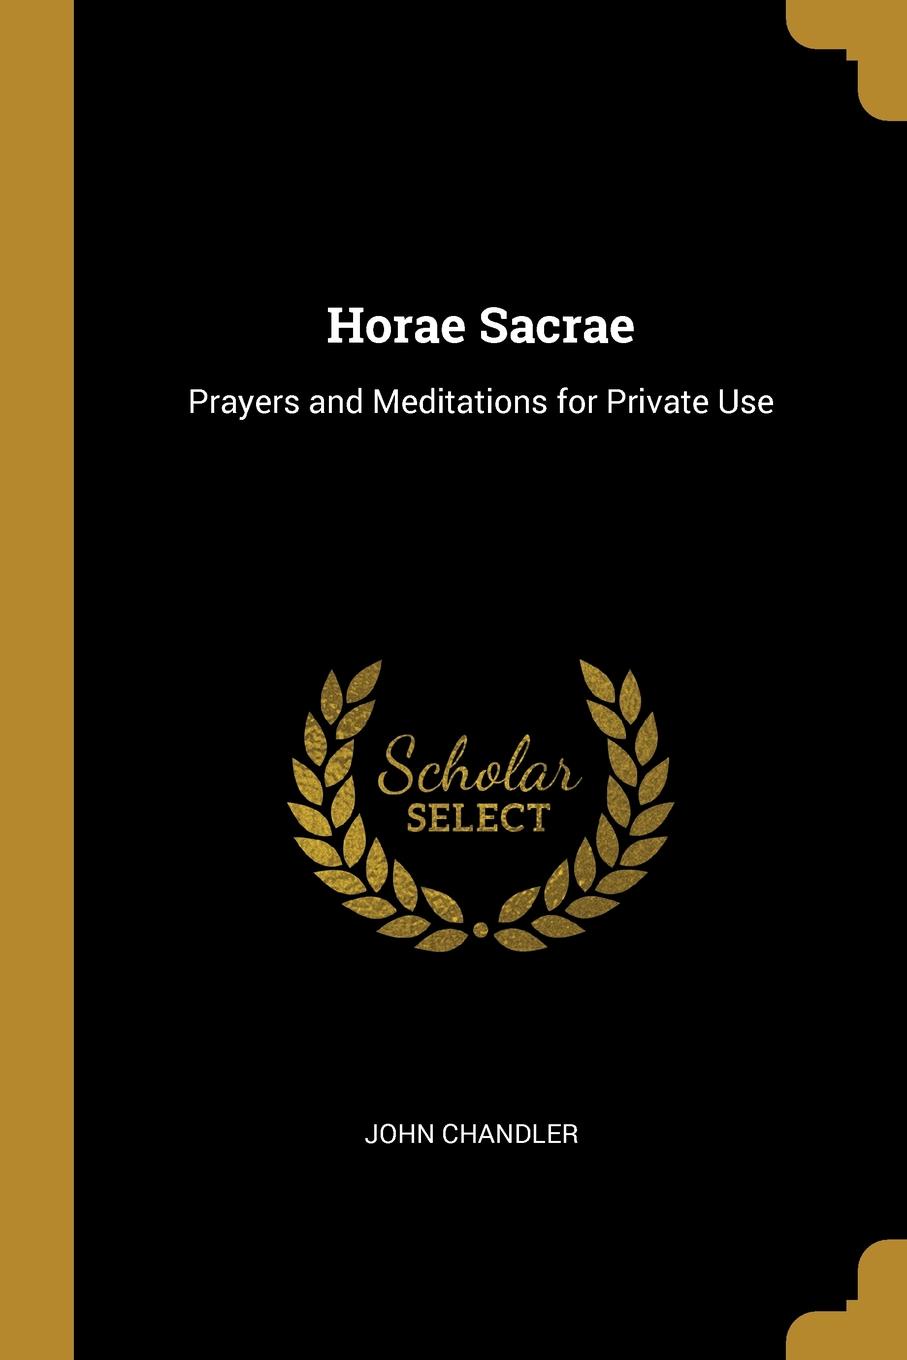 Horae Sacrae. Prayers and Meditations for Private Use